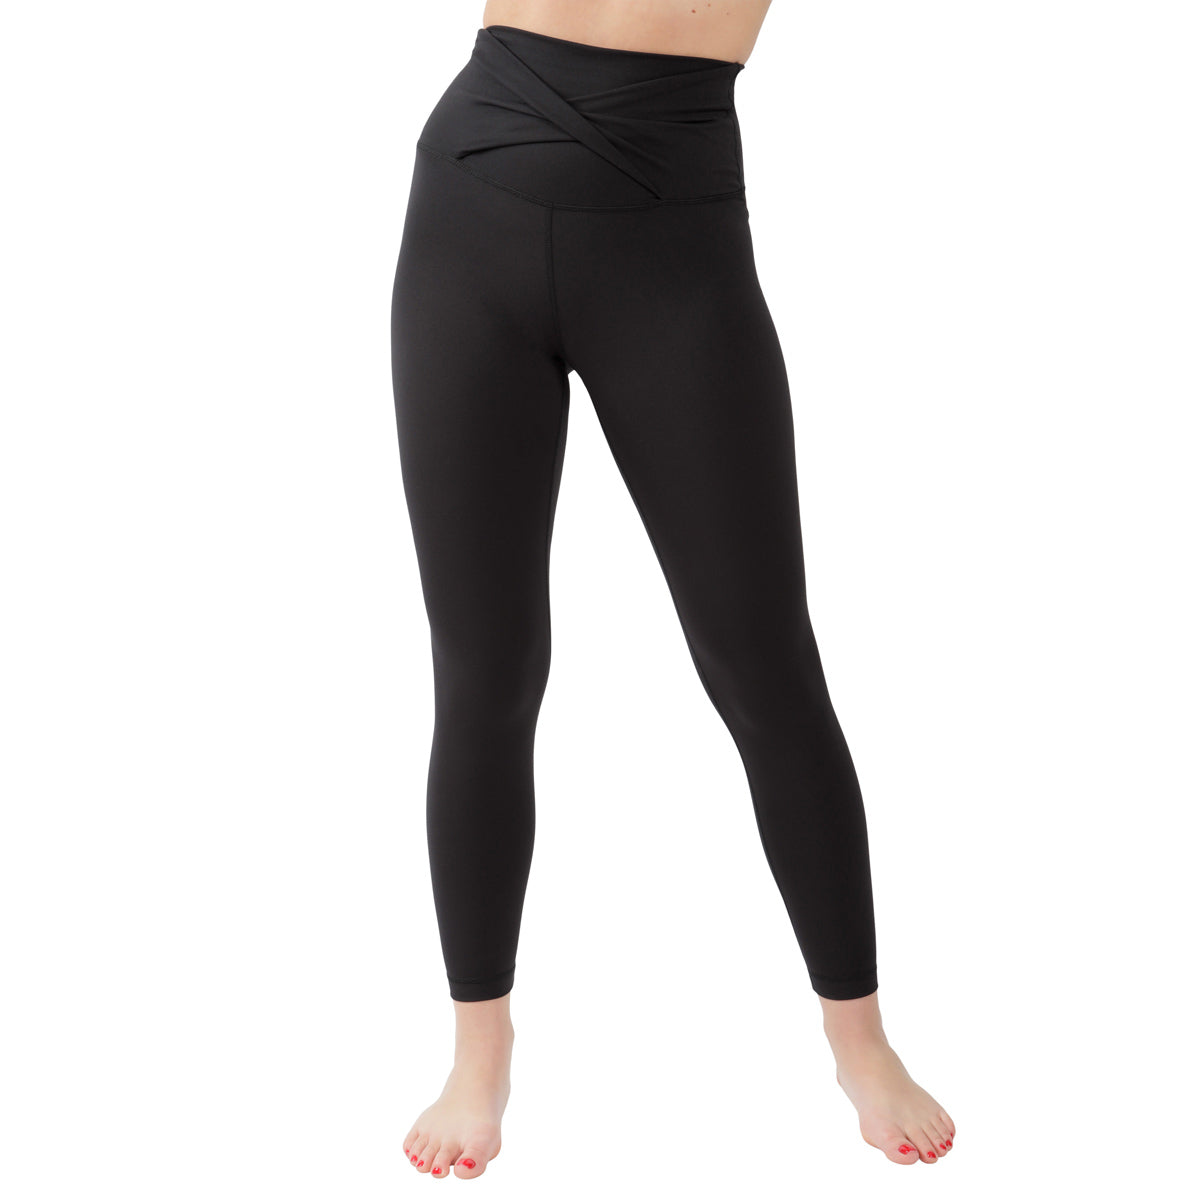 YWDJ Tights for Women High Waist Sports with Holes Yogalicious